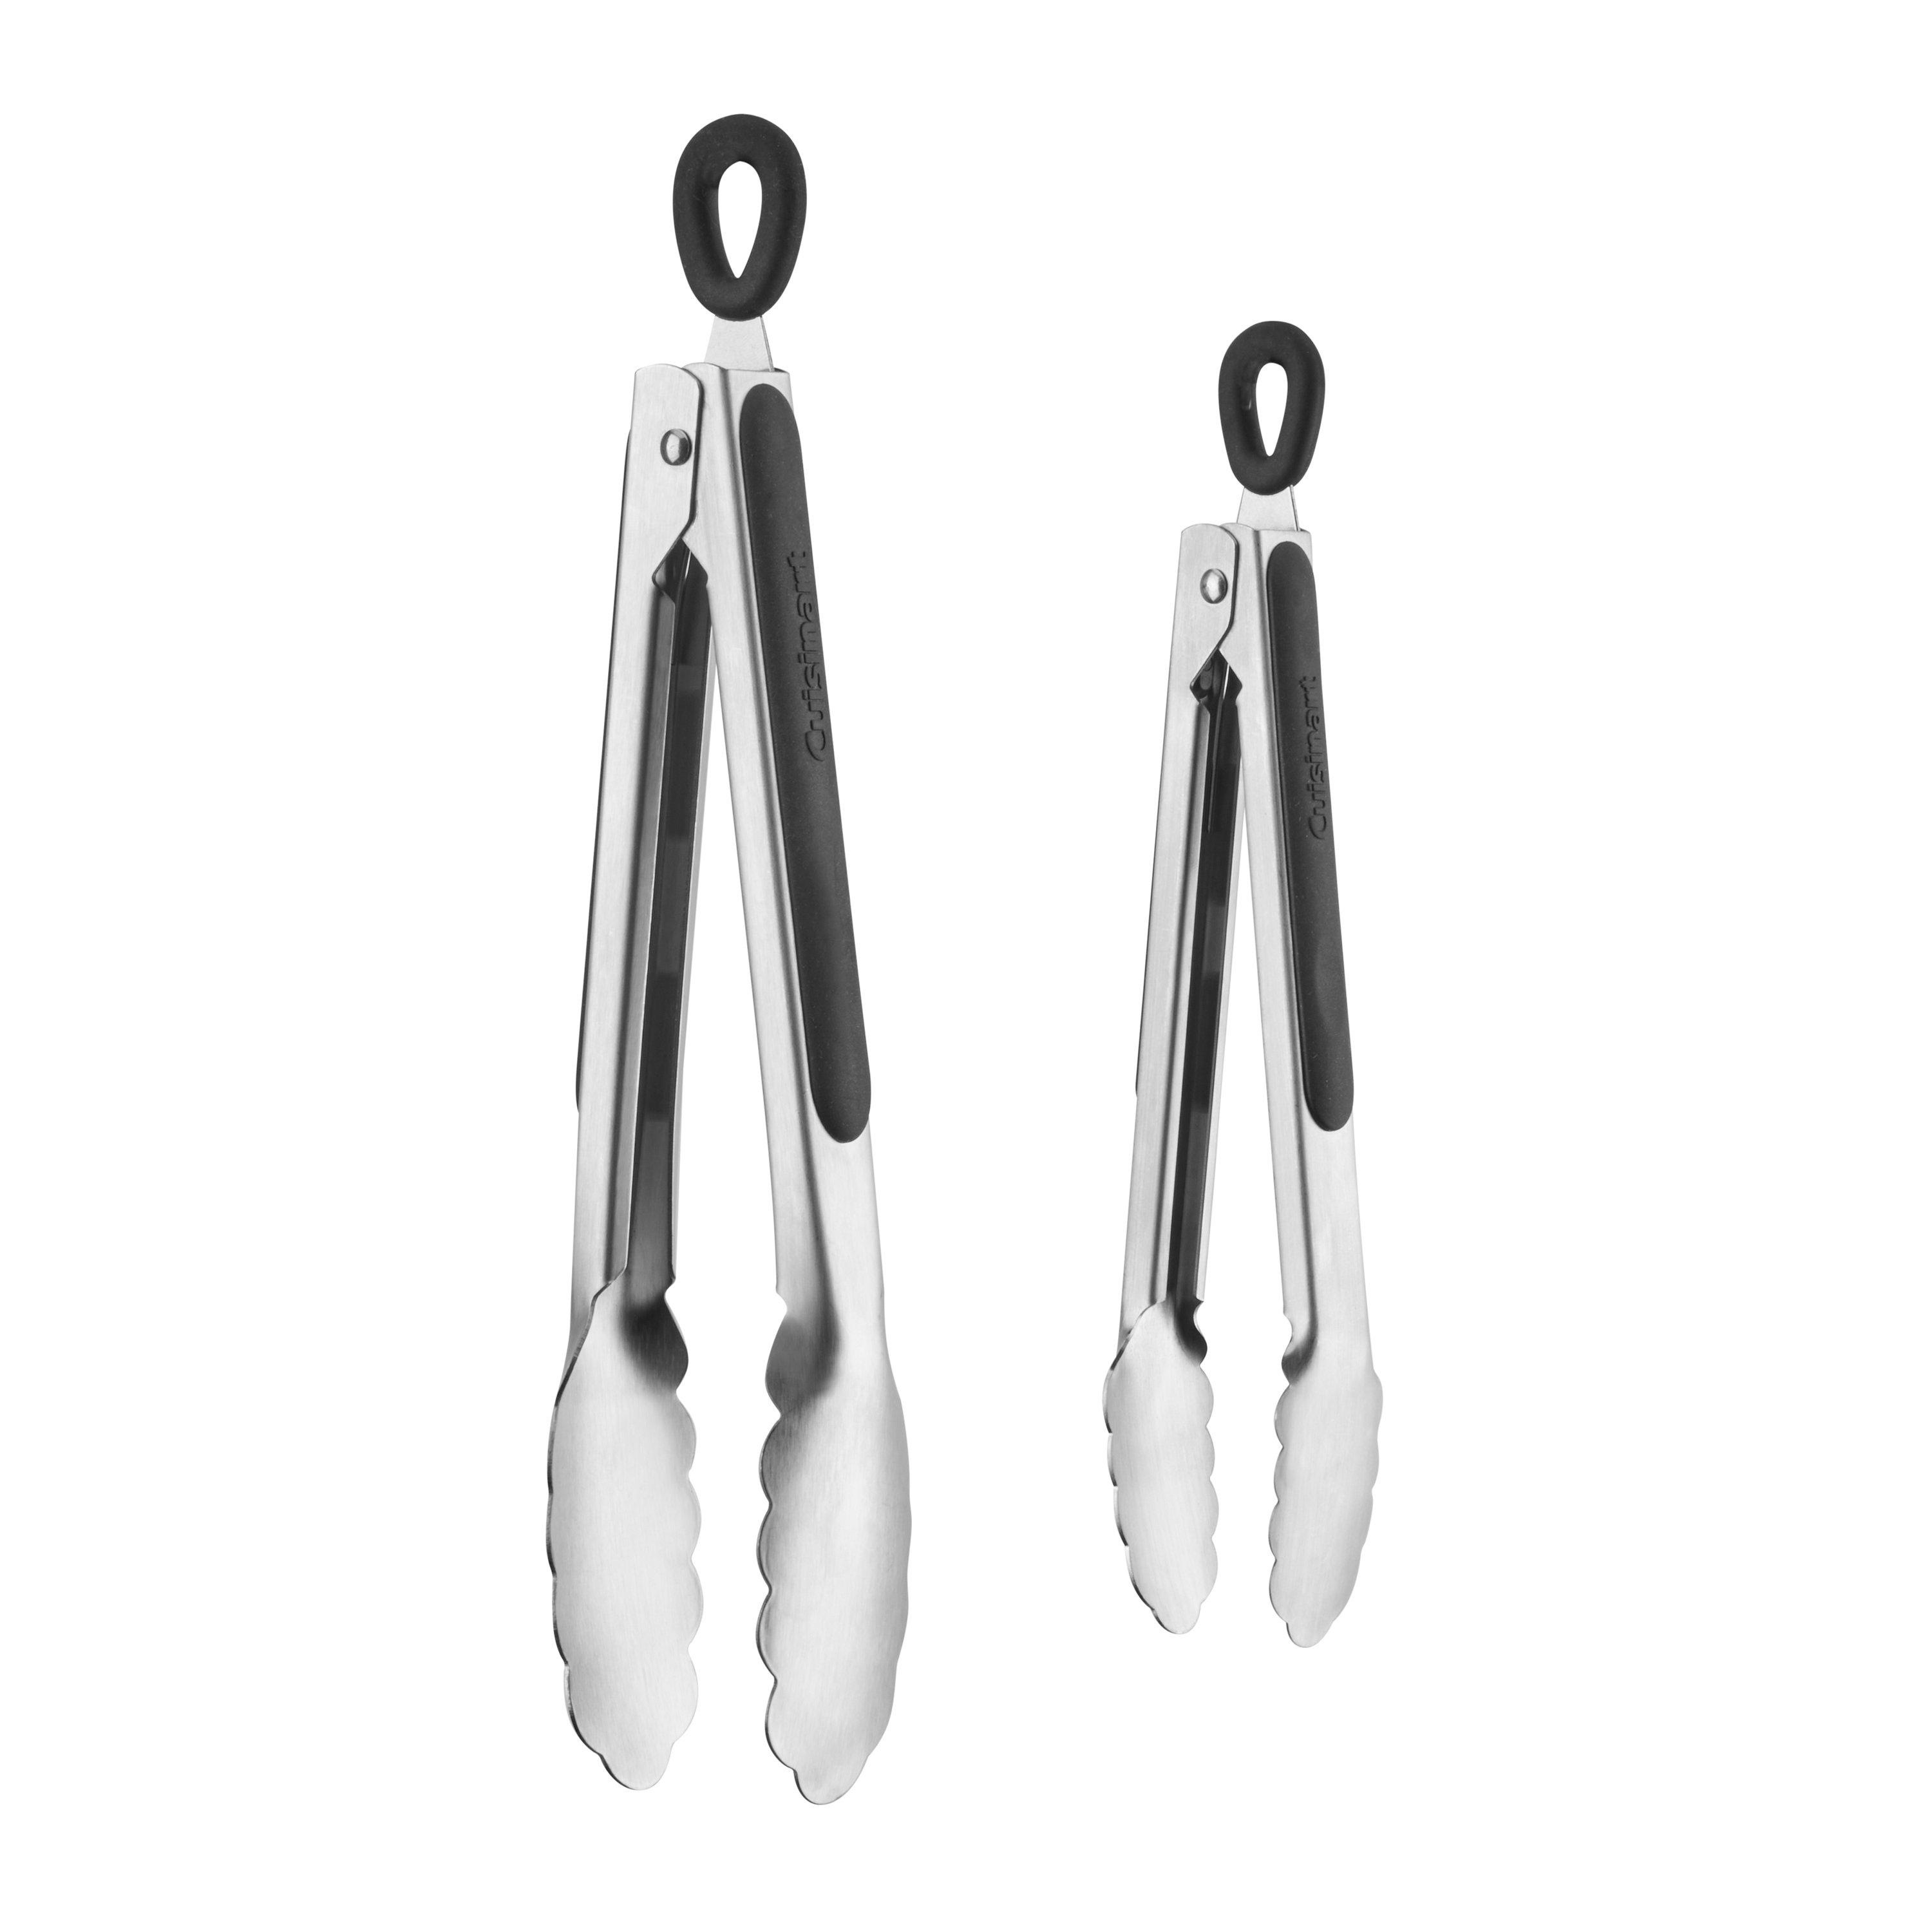 2pc Tong Set: 7" and 9" Stainless Steel Tongs